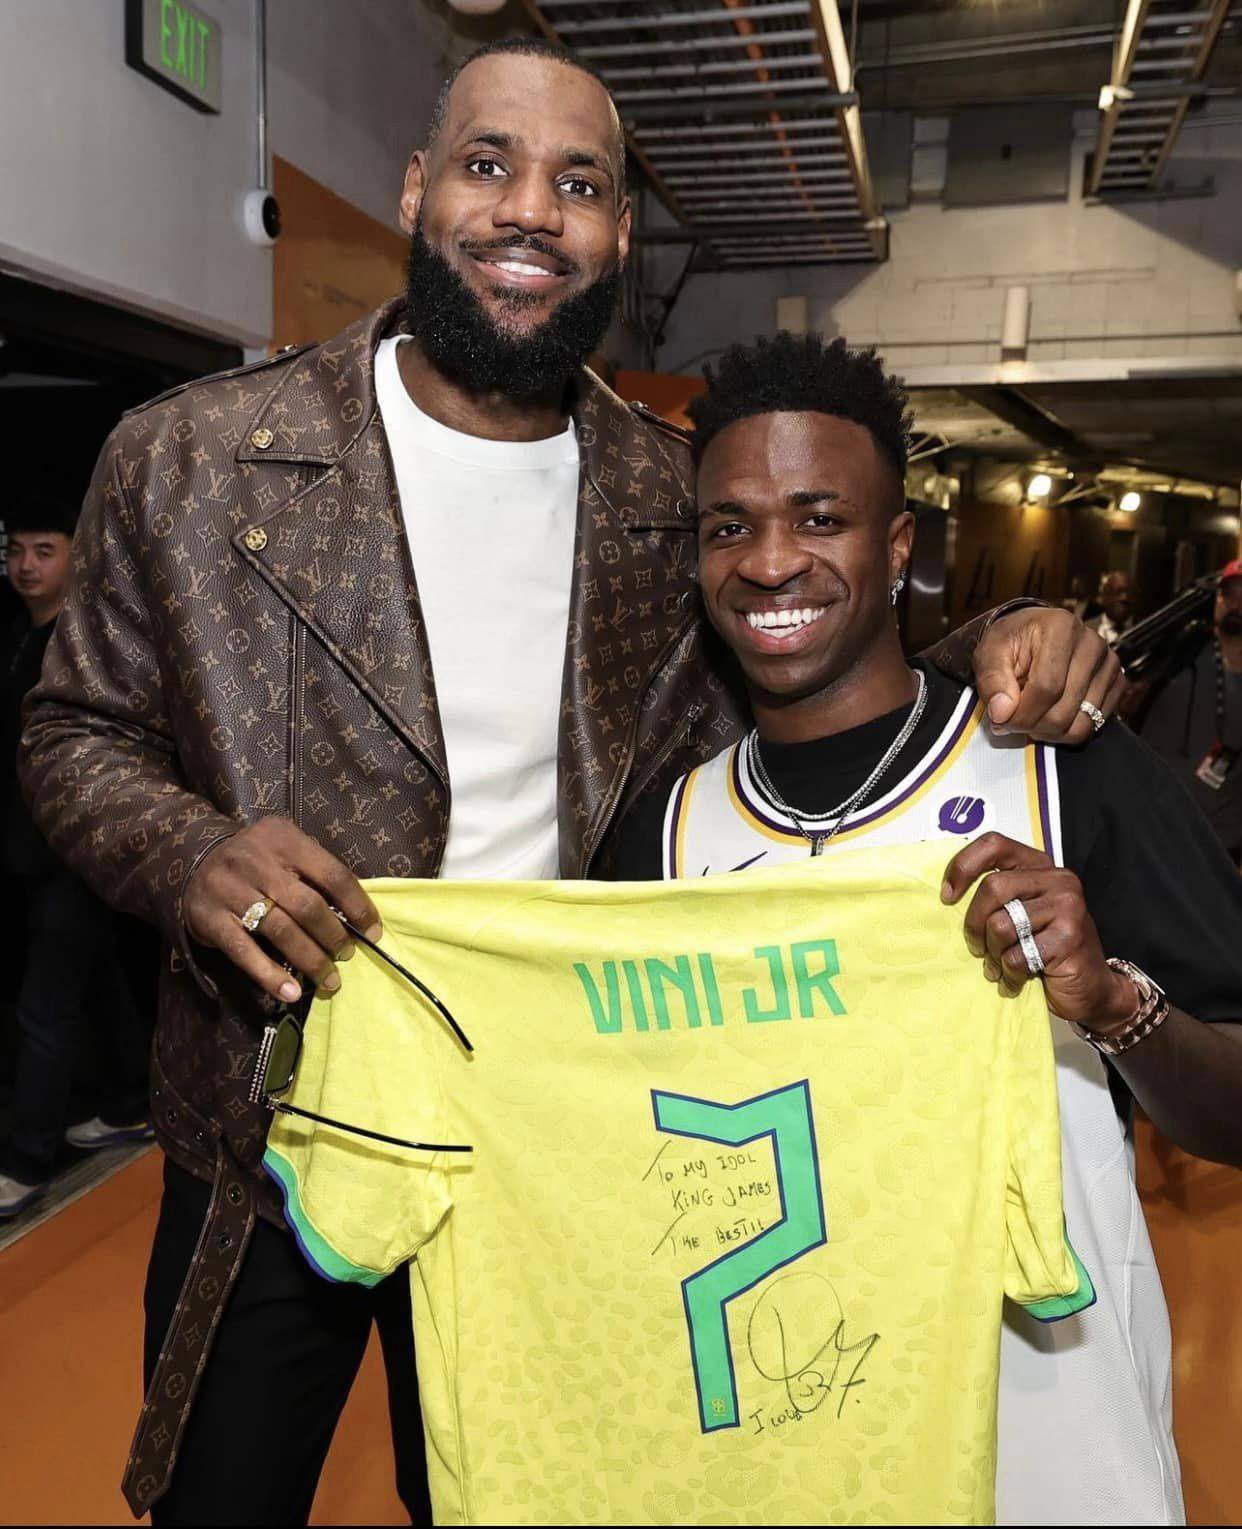 Vini Jr. and Cami Take Courtside to Bond with LeBron and Lakers’ Legends